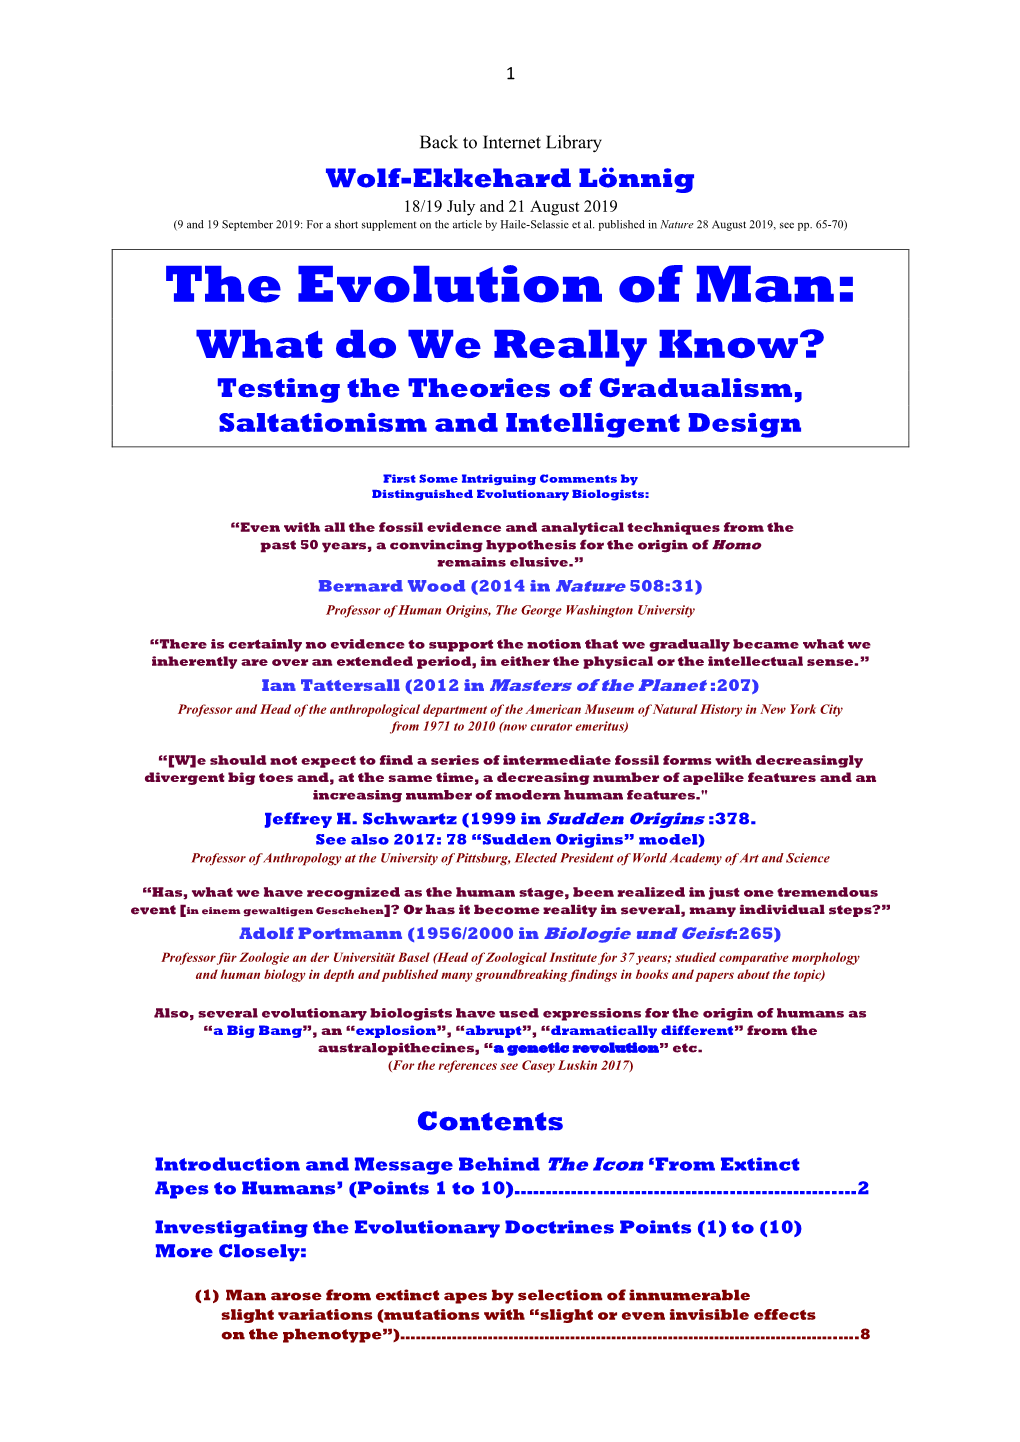 The Evolution of Man: What Do We Really Know? Testing the Theories of Gradualism, Saltationism and Intelligent Design